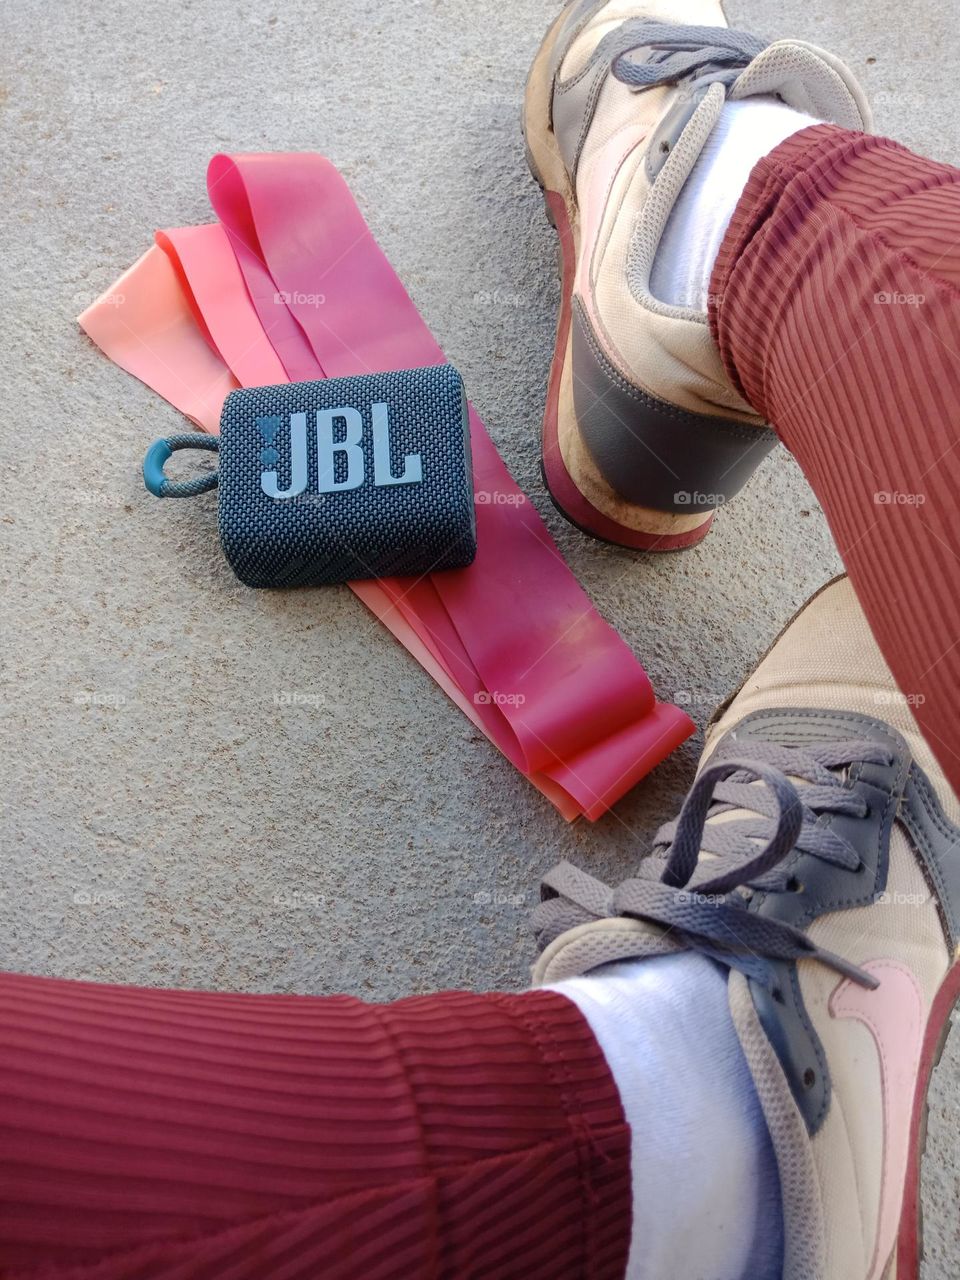 Pink exercise bands,  JBL go box, Nike shoes grey and pink,  partial legs,  grey floor